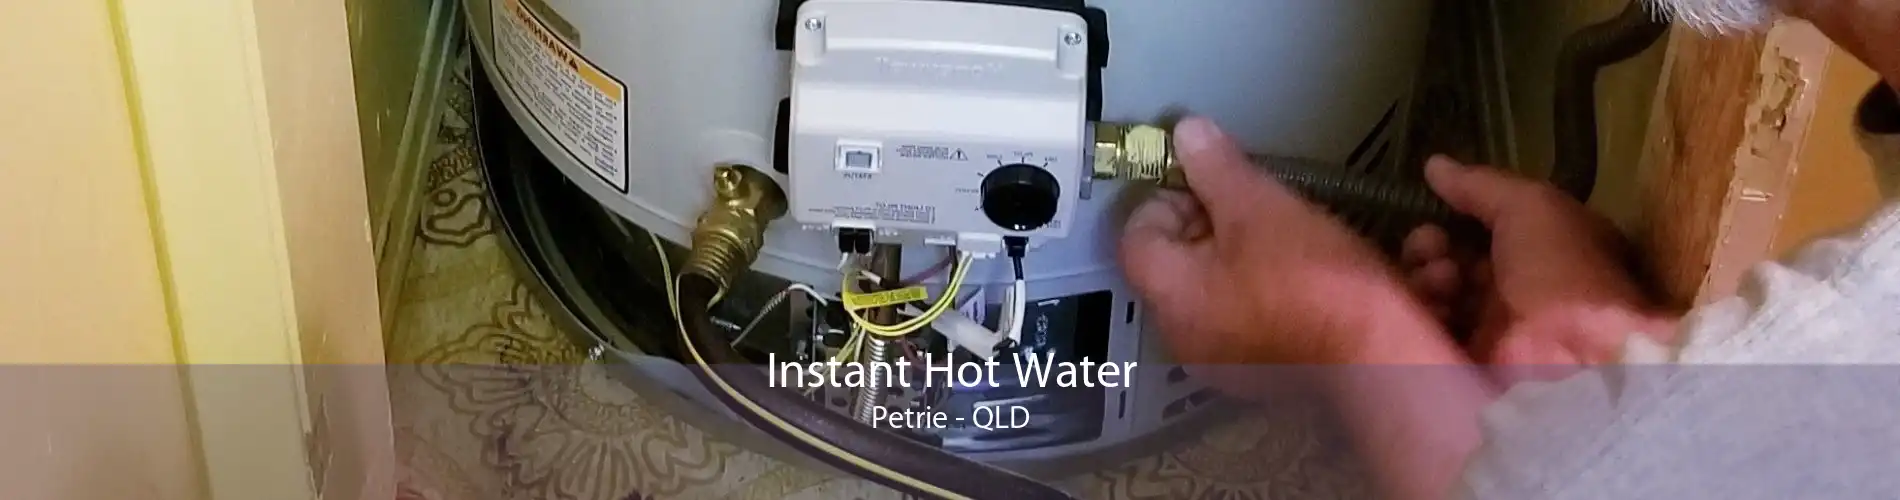 Instant Hot Water Petrie - QLD